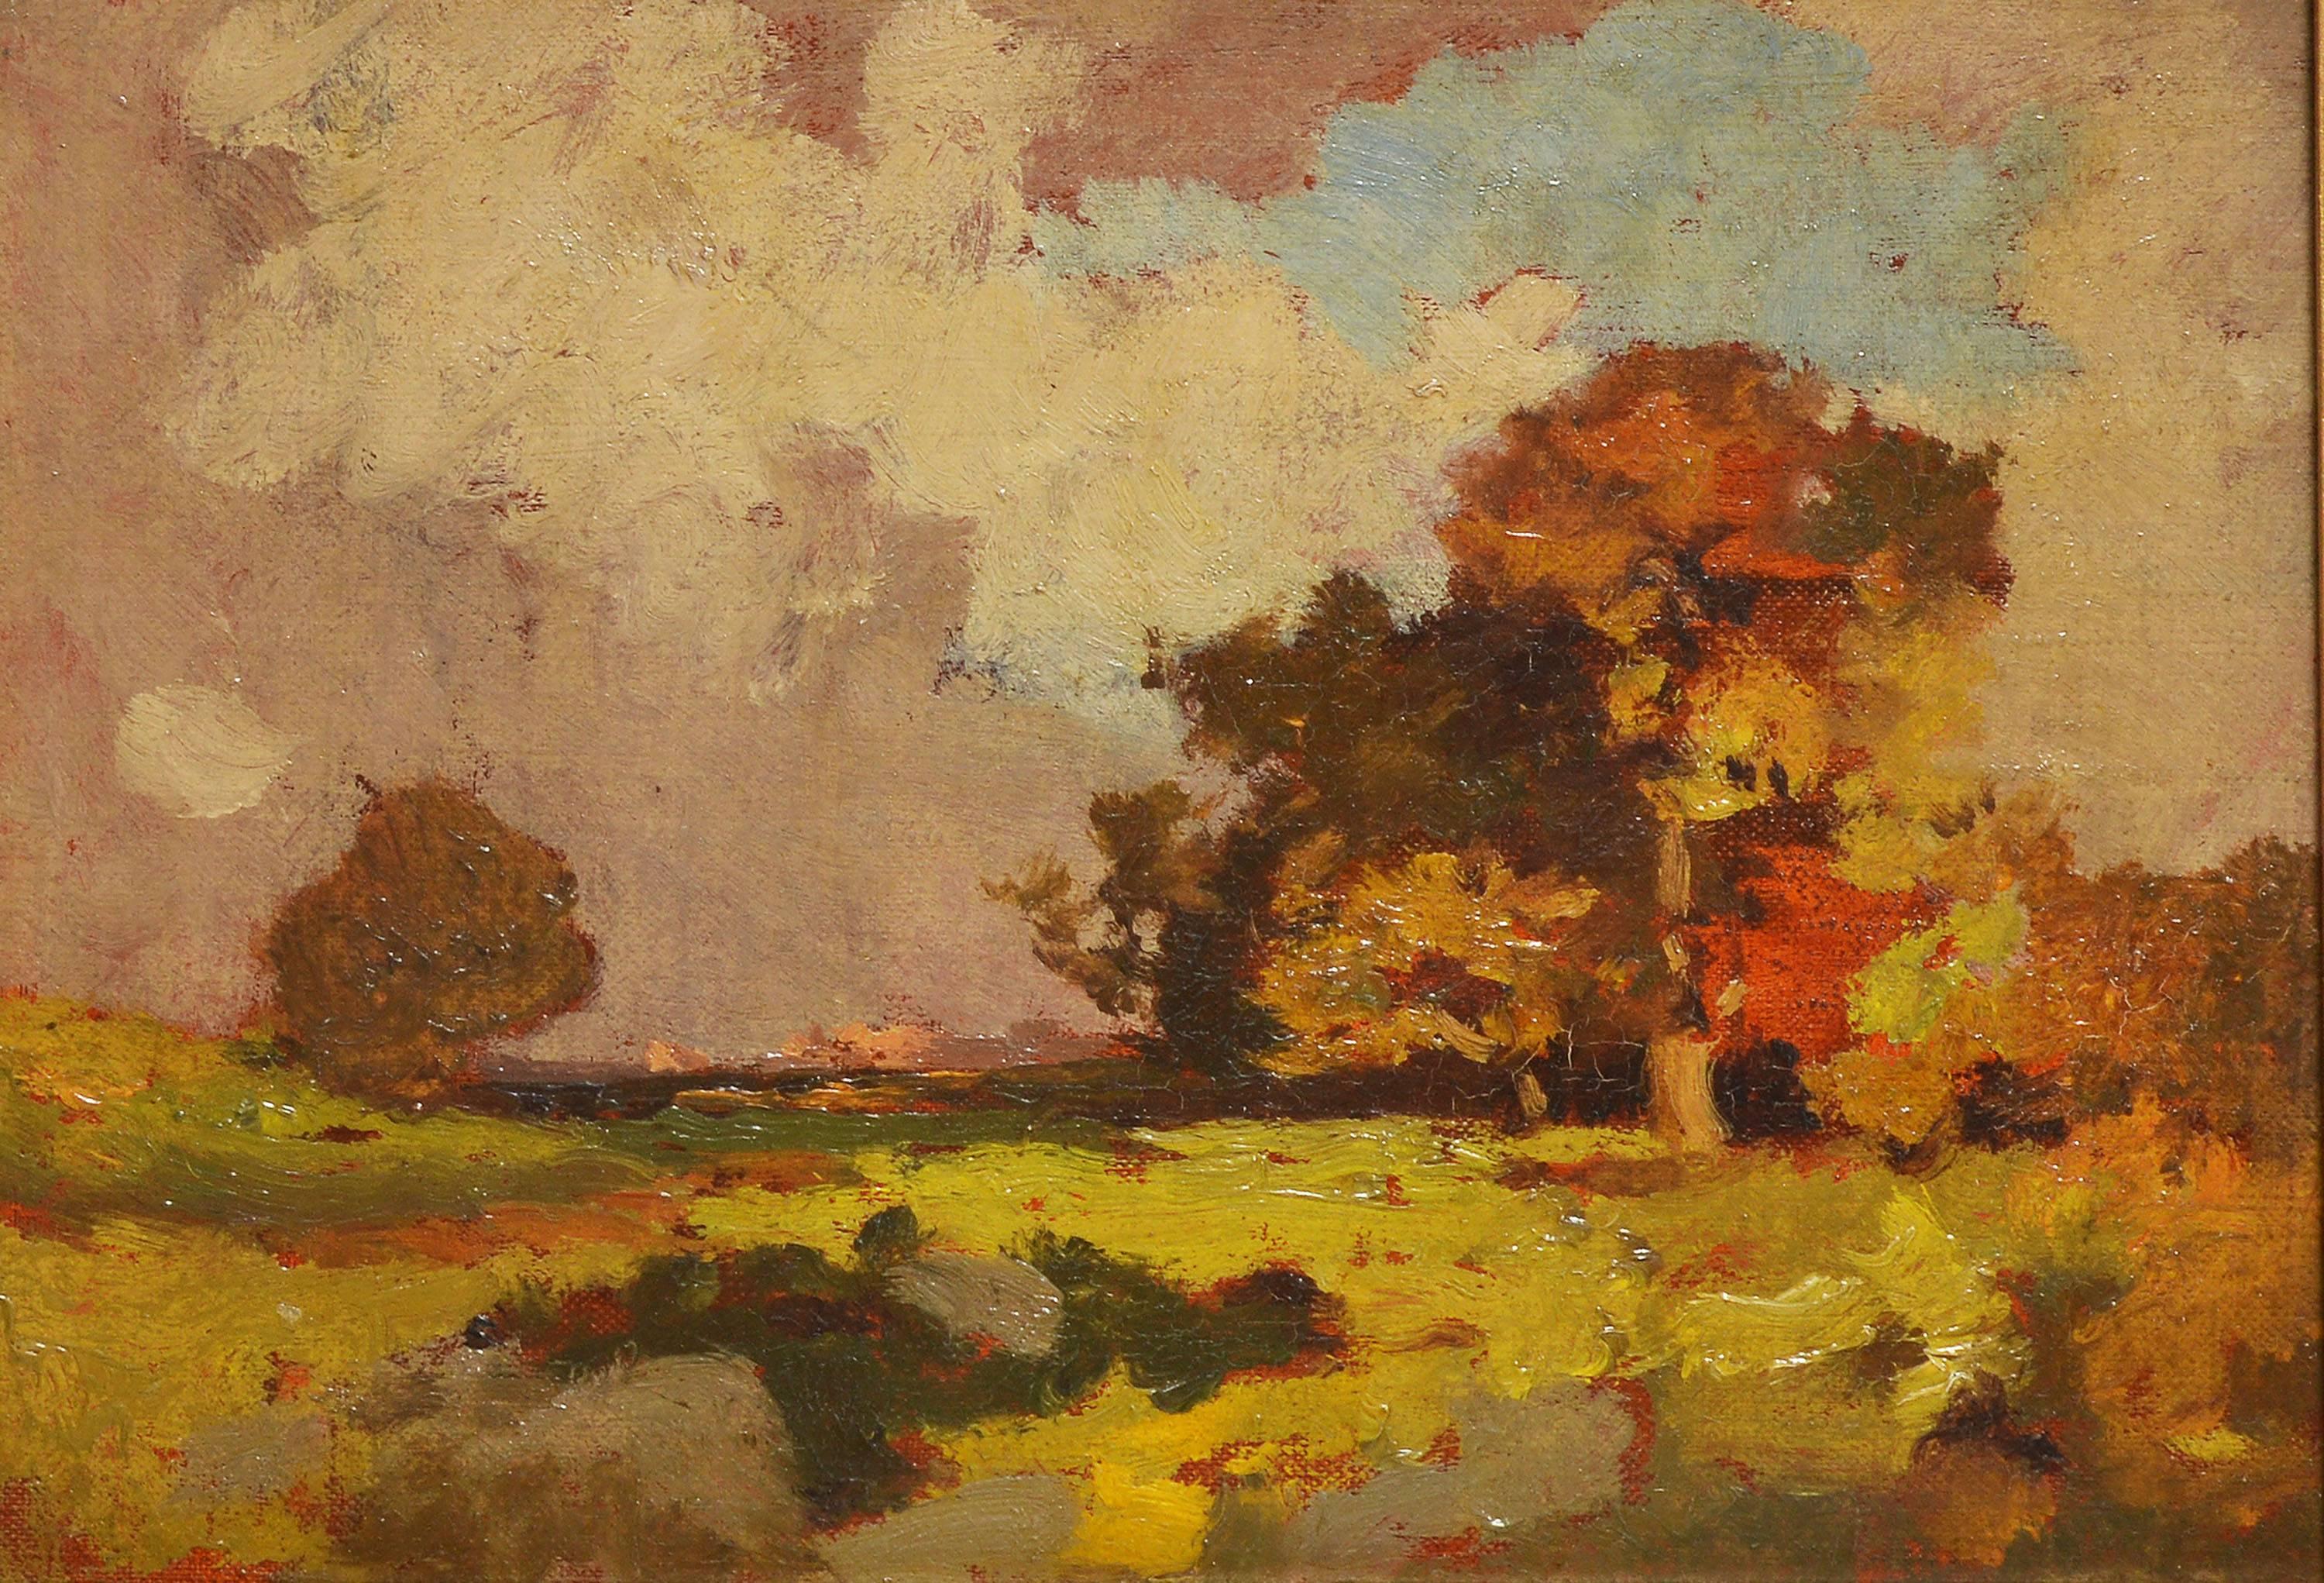 Tonalist painting of a sunset landscape. Oil on board, circa 1900. Unsigned. Displayed in a period giltwood frame.  Image size, 8.5